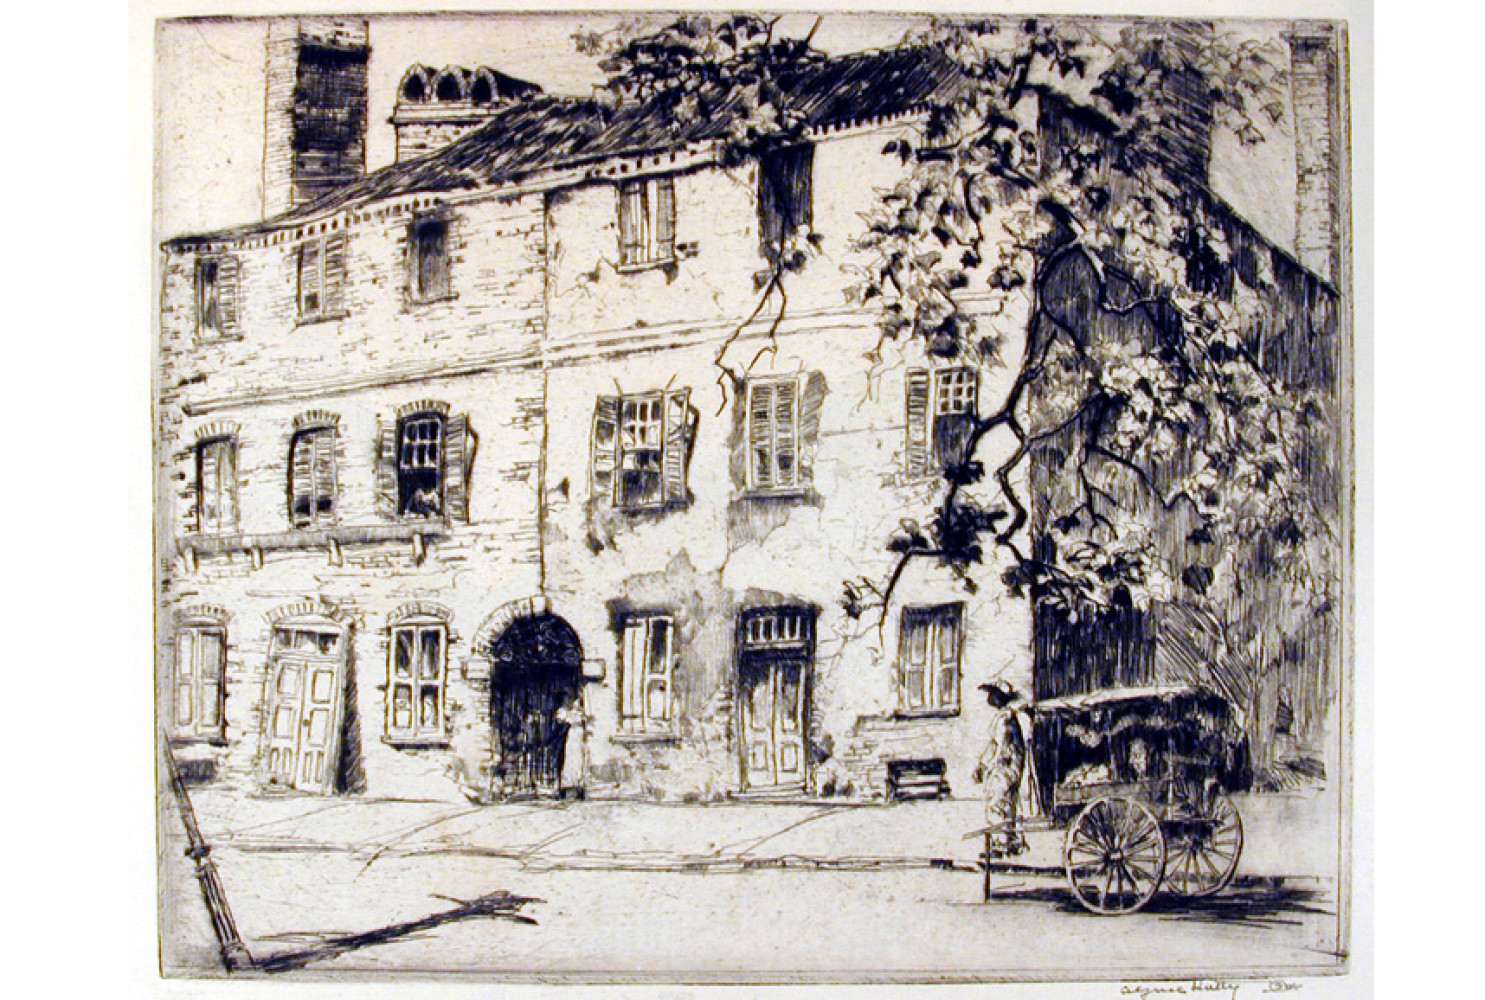 Cabbage Row, 1928, by Alfred Hutty (American, 1877-1954); etching on paper; 11 3/8 x 15 1/8 inches; Gift of Mrs. Alfred Hutty; 1955.007.0046